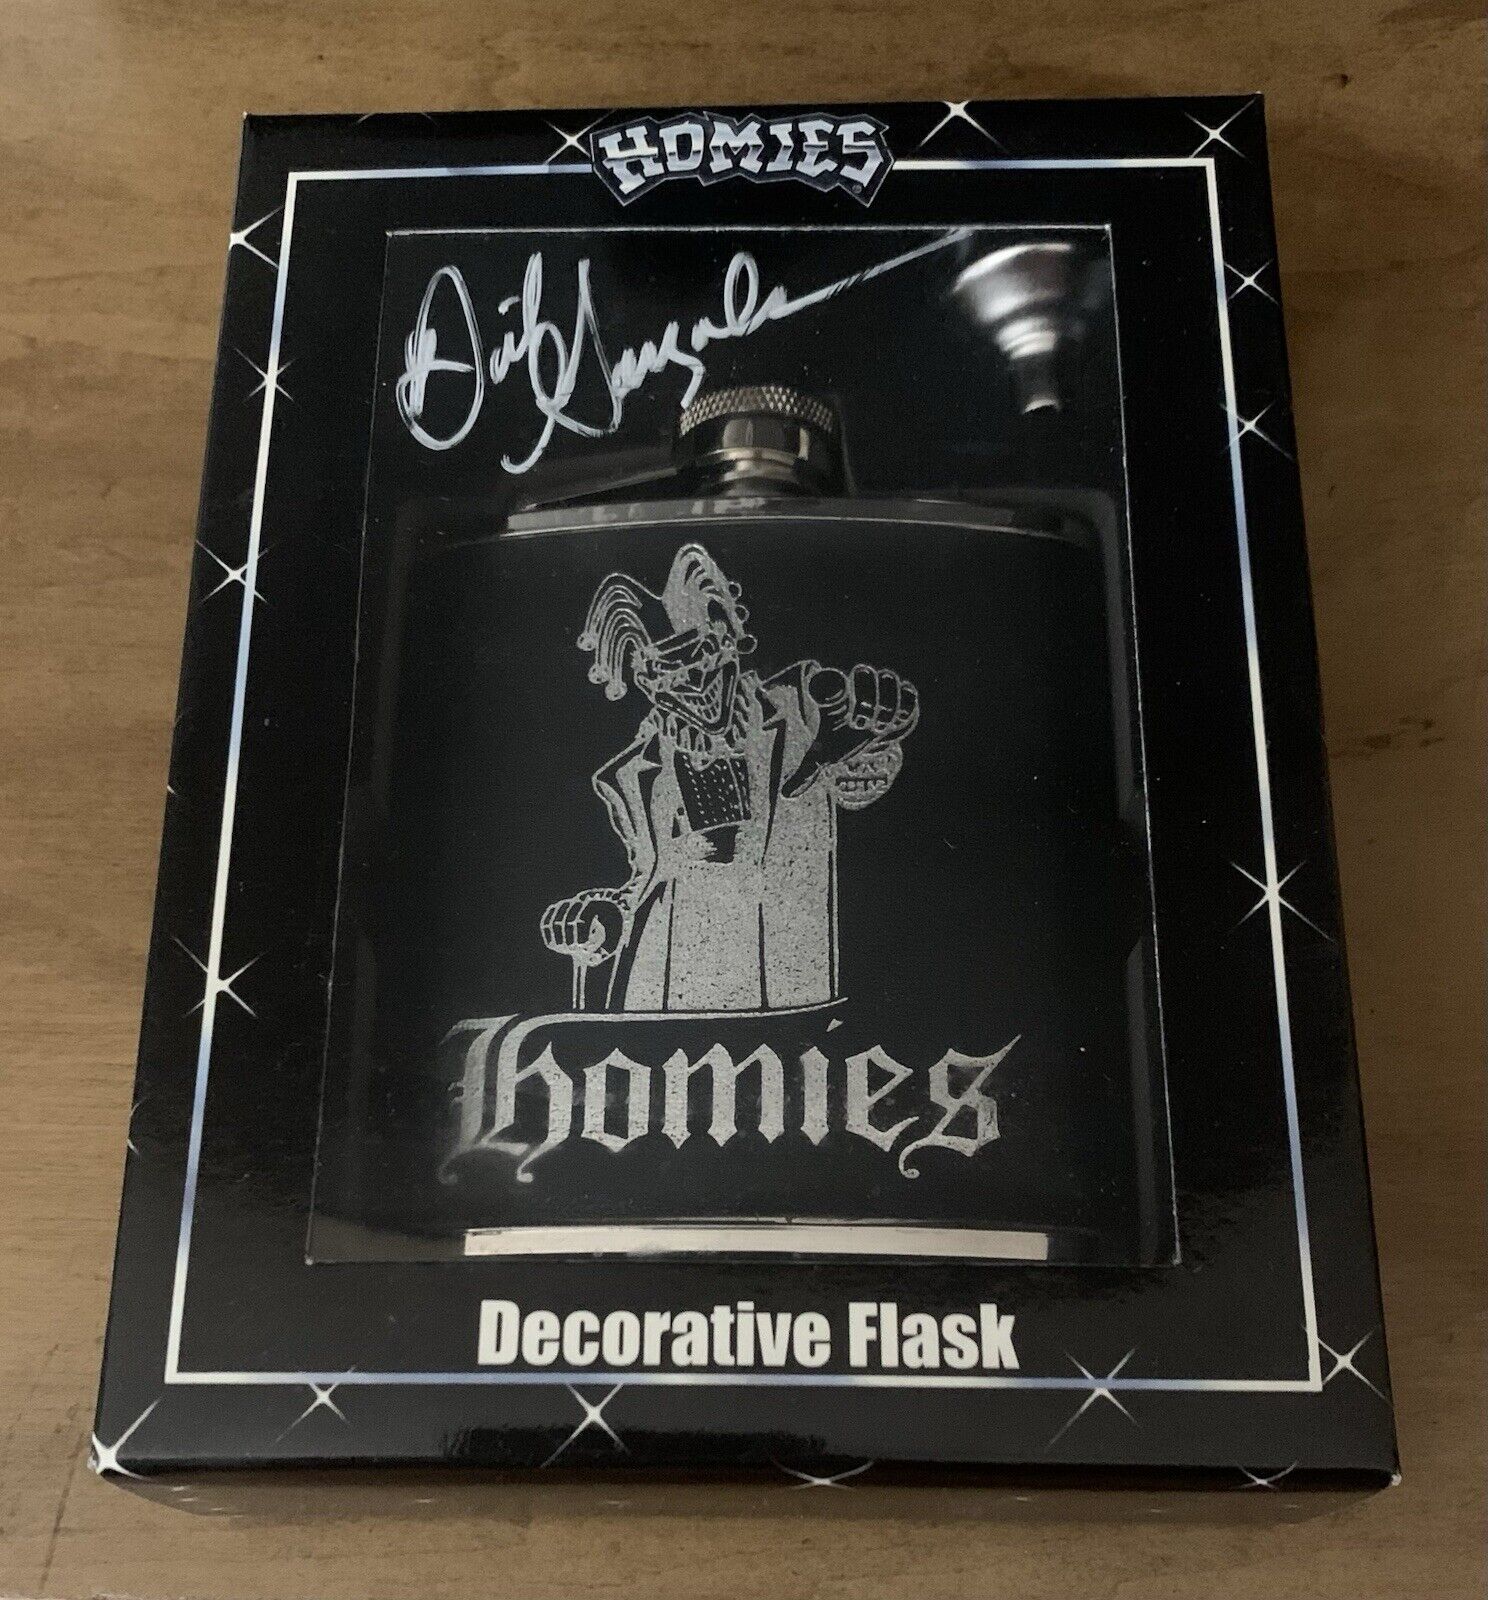 VHTF New Homies 2004 Decorative Flask Signed By David Gonzales “Homie King”